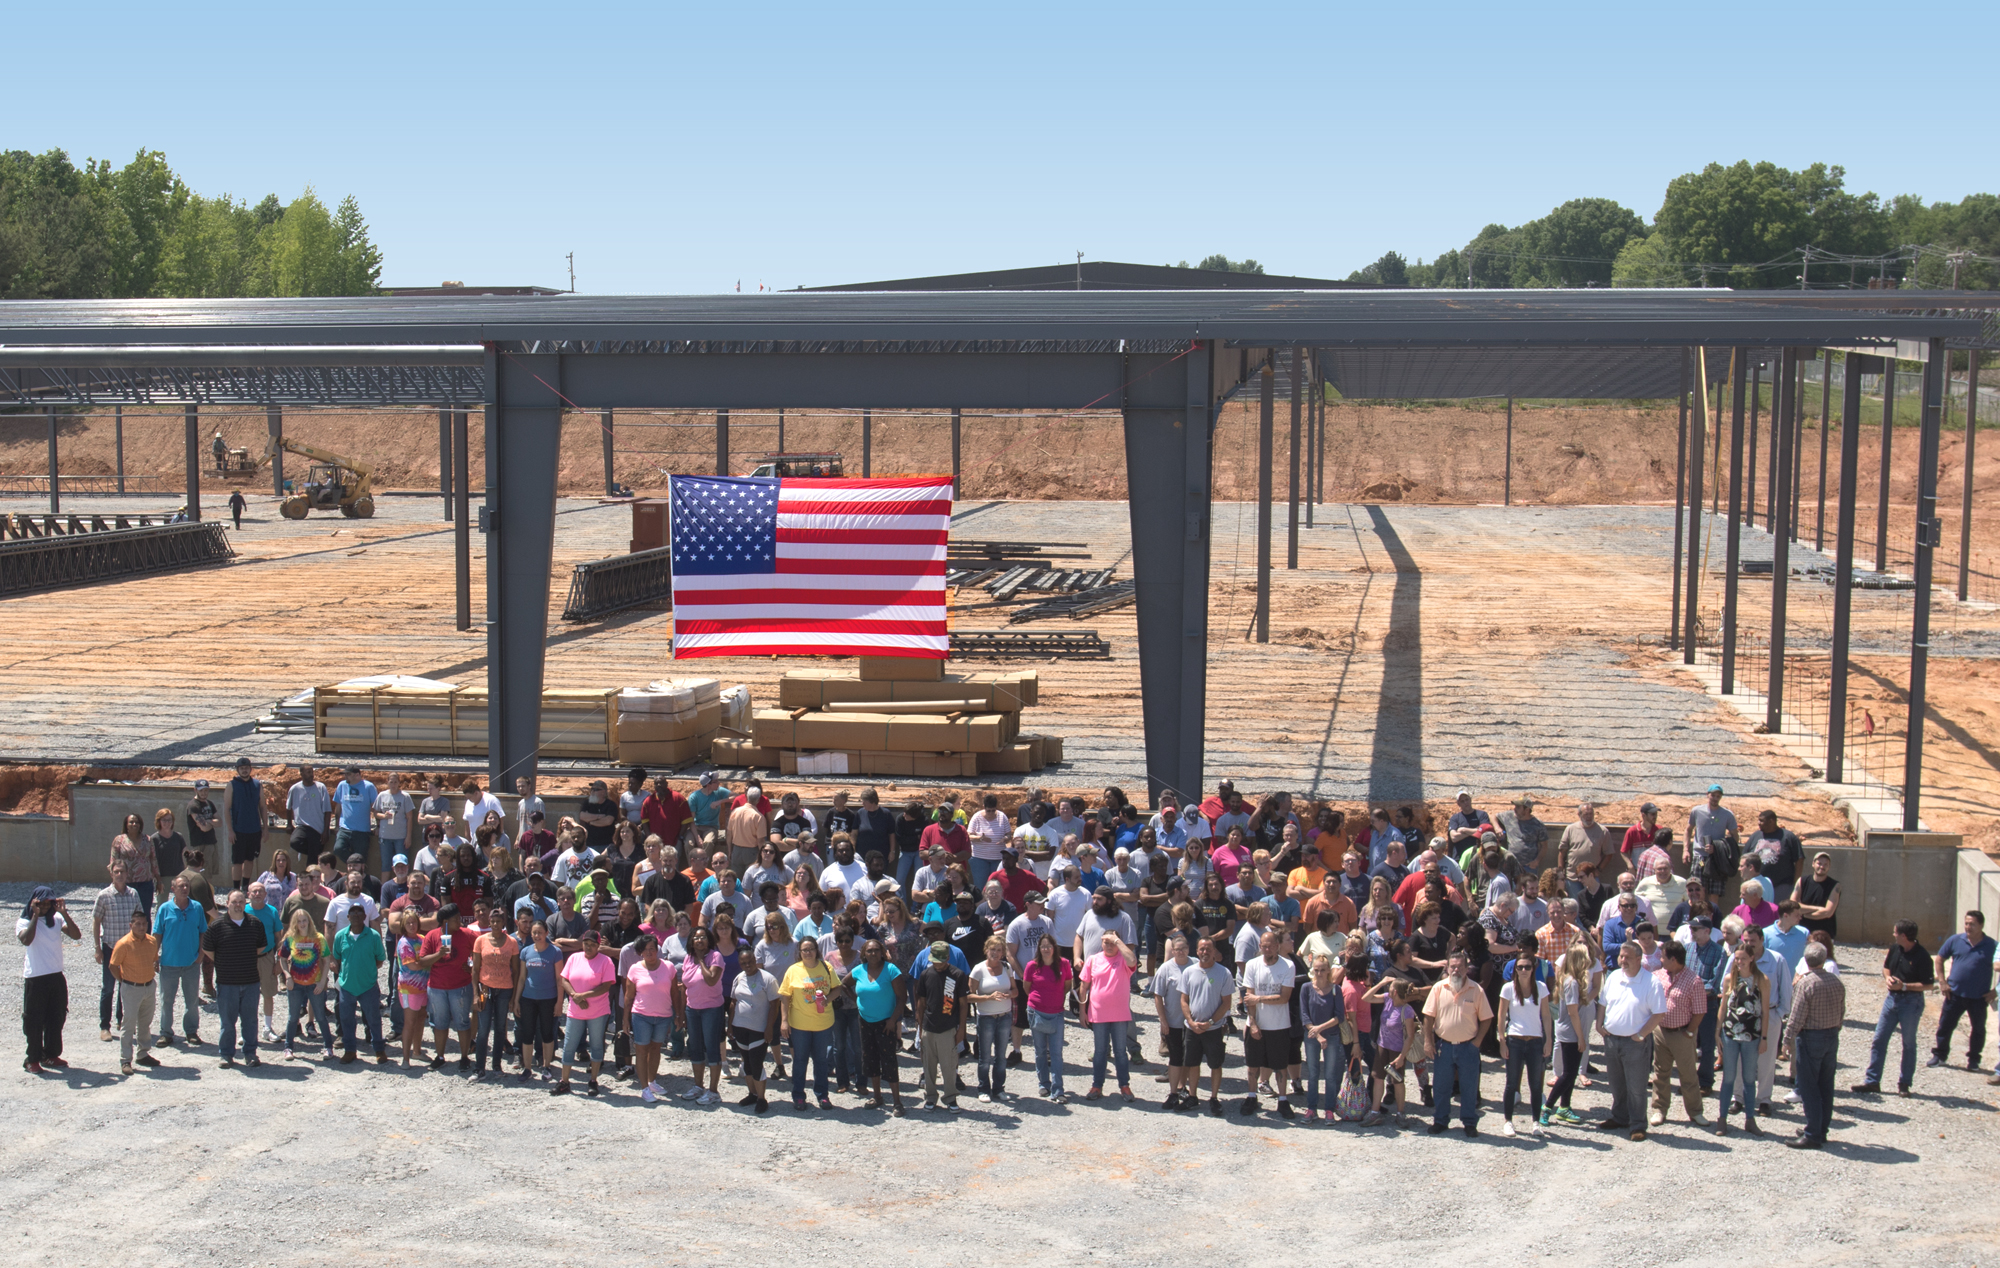 Above: A group of STI employees standing in front of their new 150,000 sq. ft. plant that opened in January 2018.